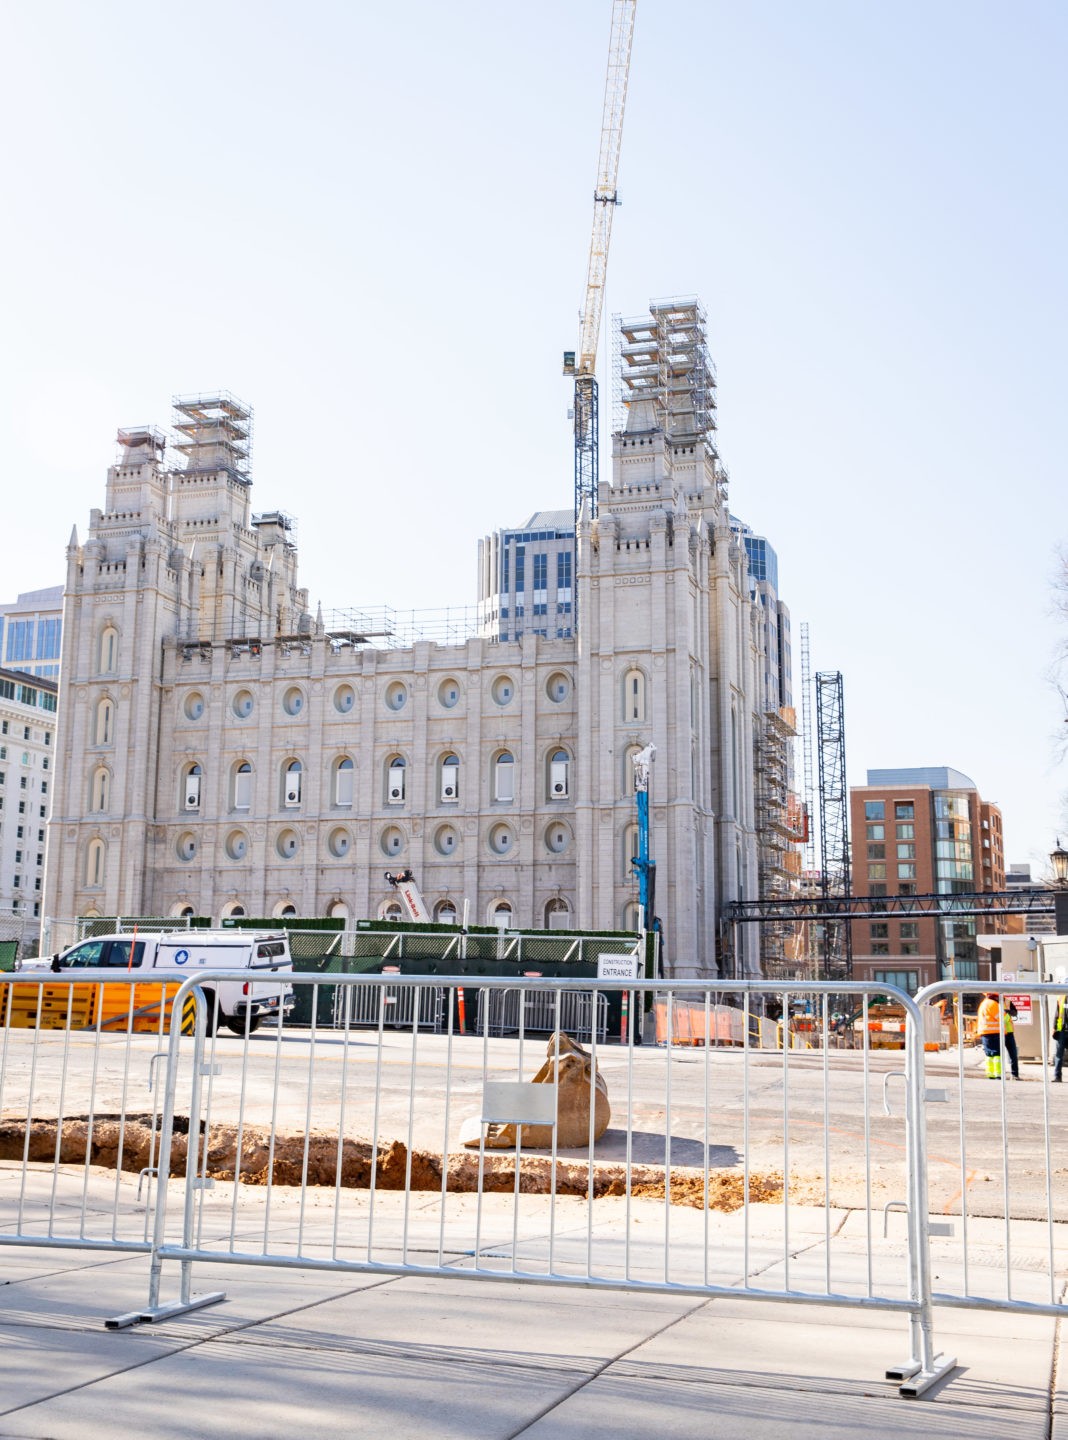 Temple Square renovations in full swing as Conference approaches The